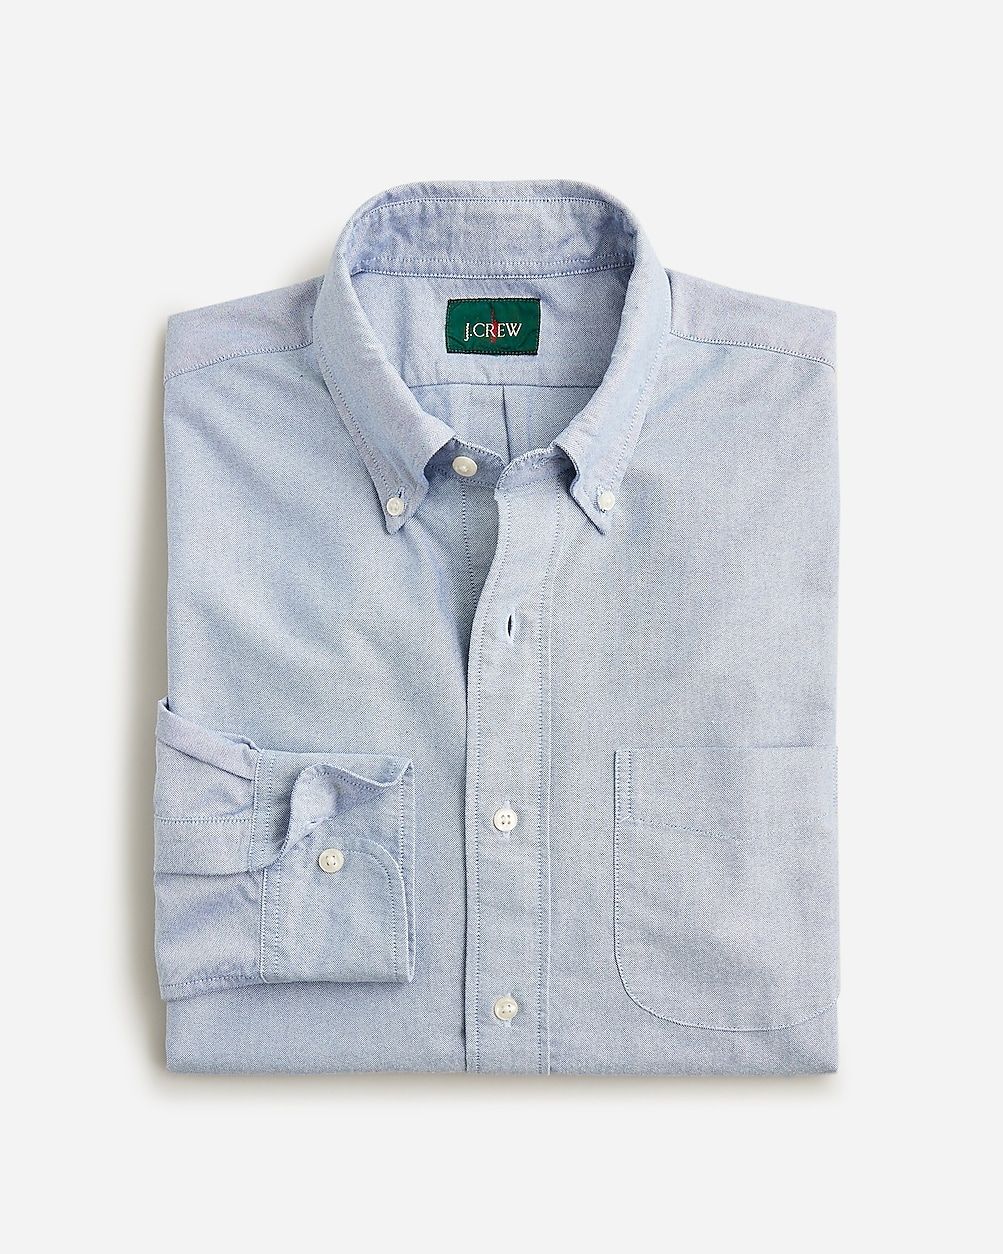 Giant-fit oxford shirt | J.Crew US